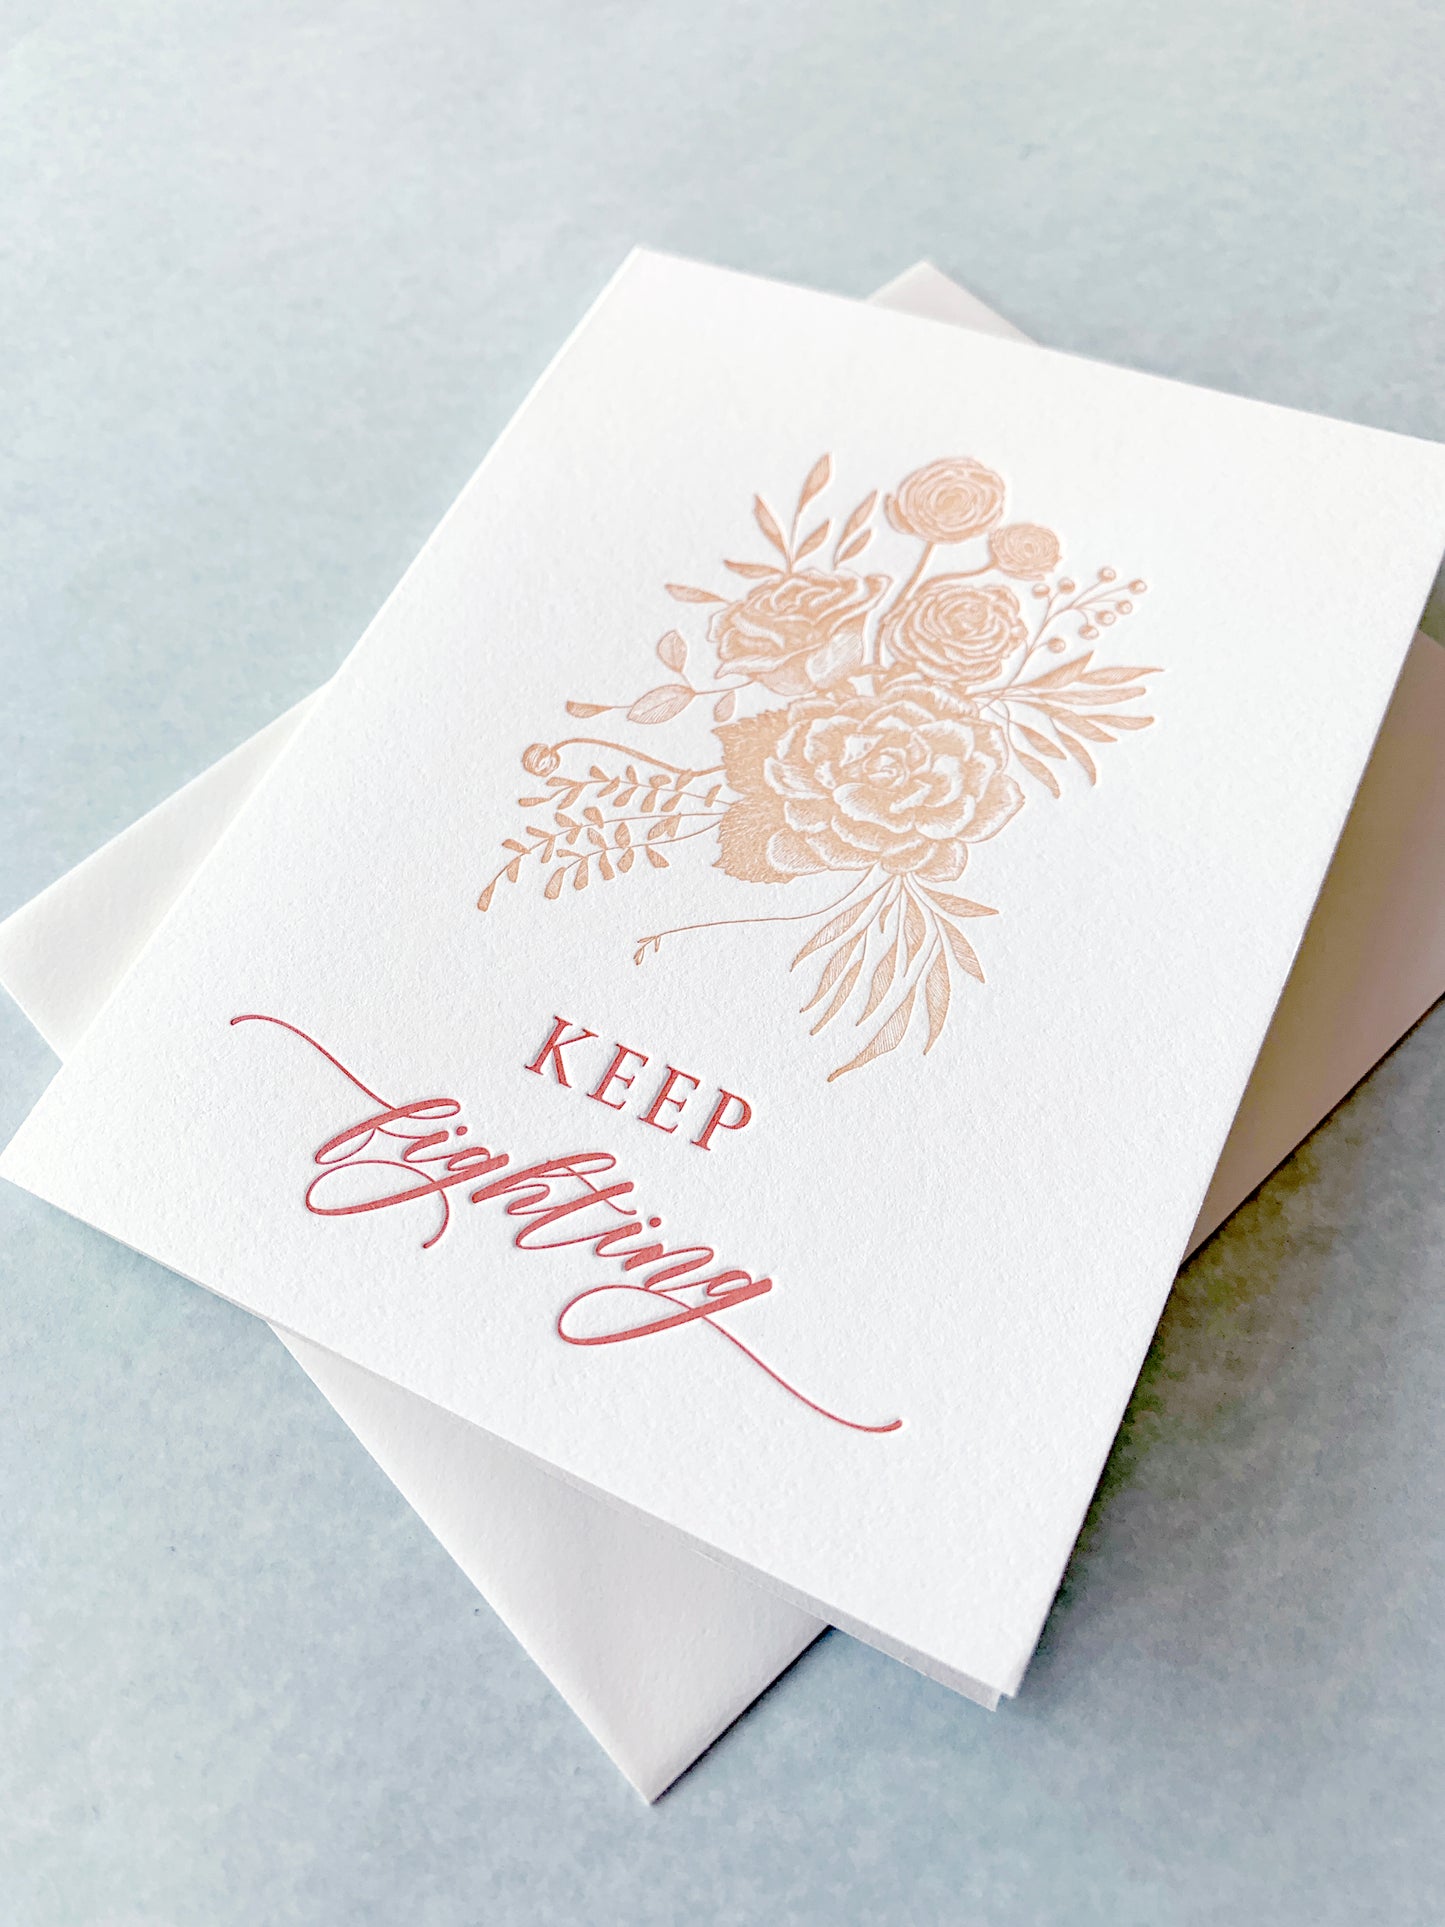 Letterpress friendship card with florals that says "Keep fighting" by Rust Belt Love